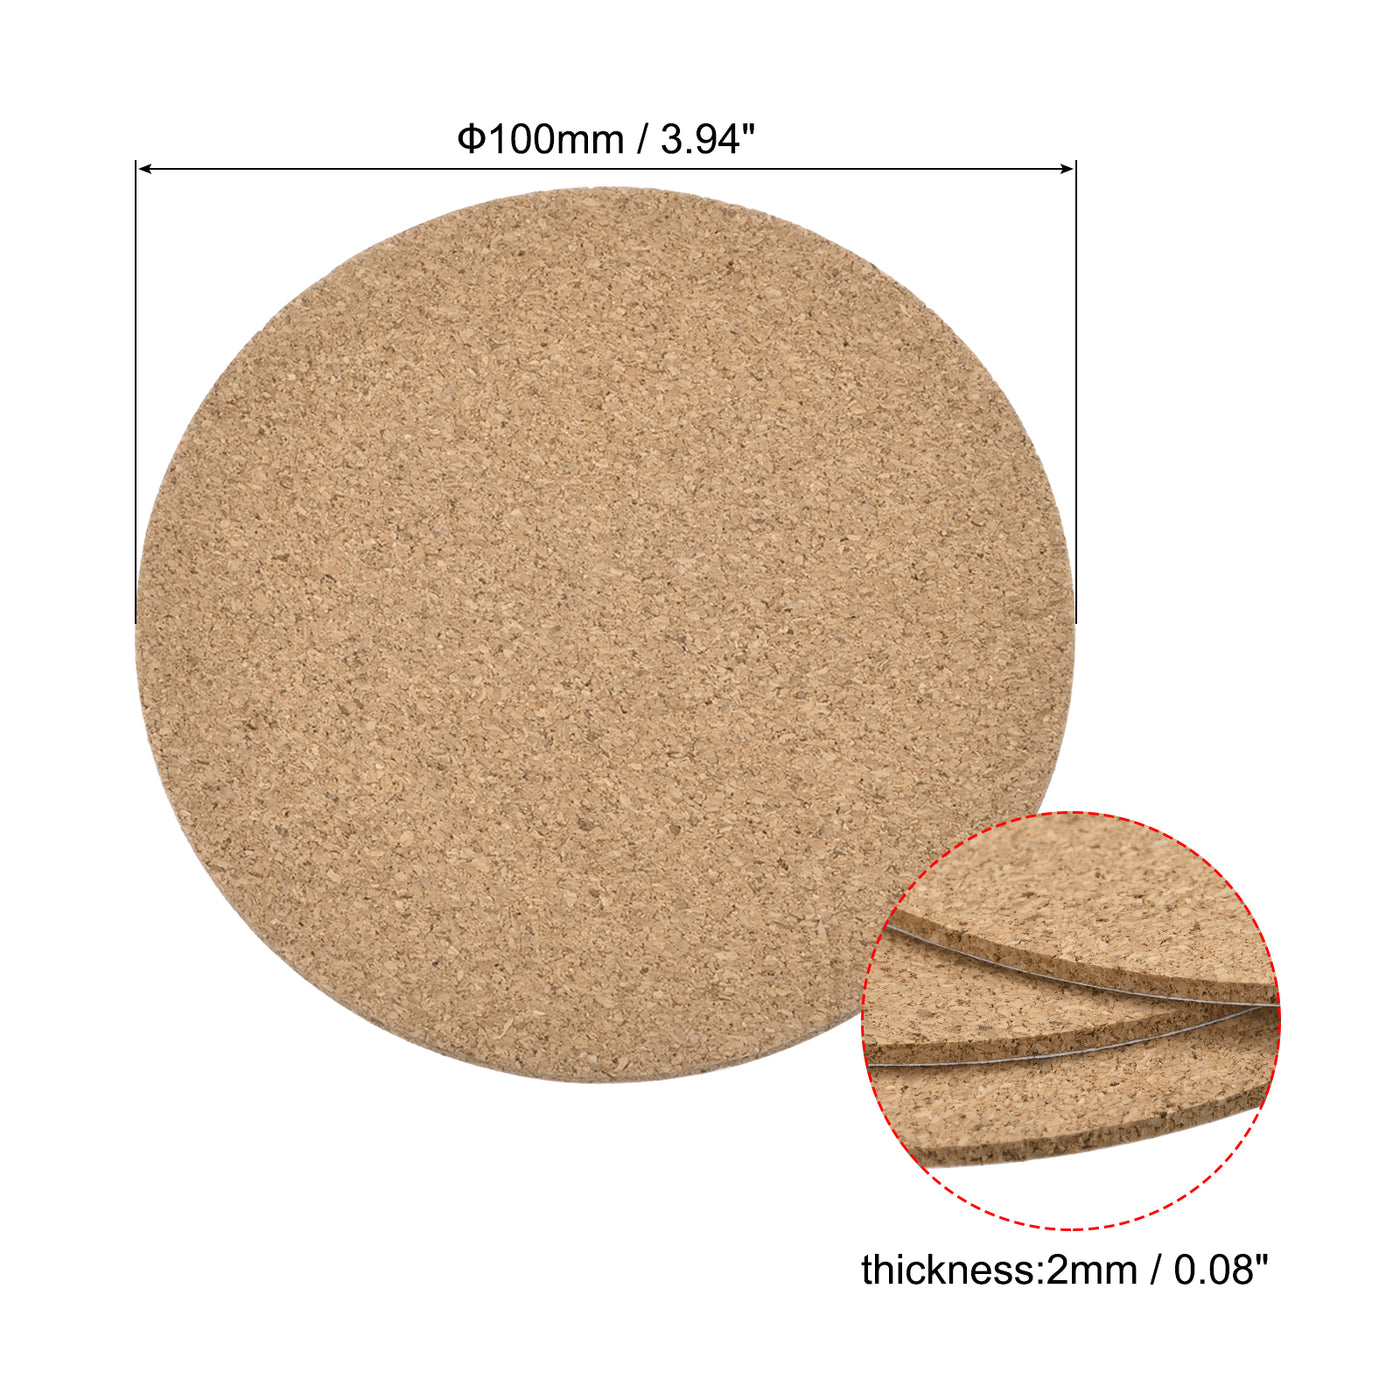 uxcell Uxcell 100mm(3.94") Round Coasters 2mm Thick Cork Cup Mat Self-Adhesive Pad 4pcs